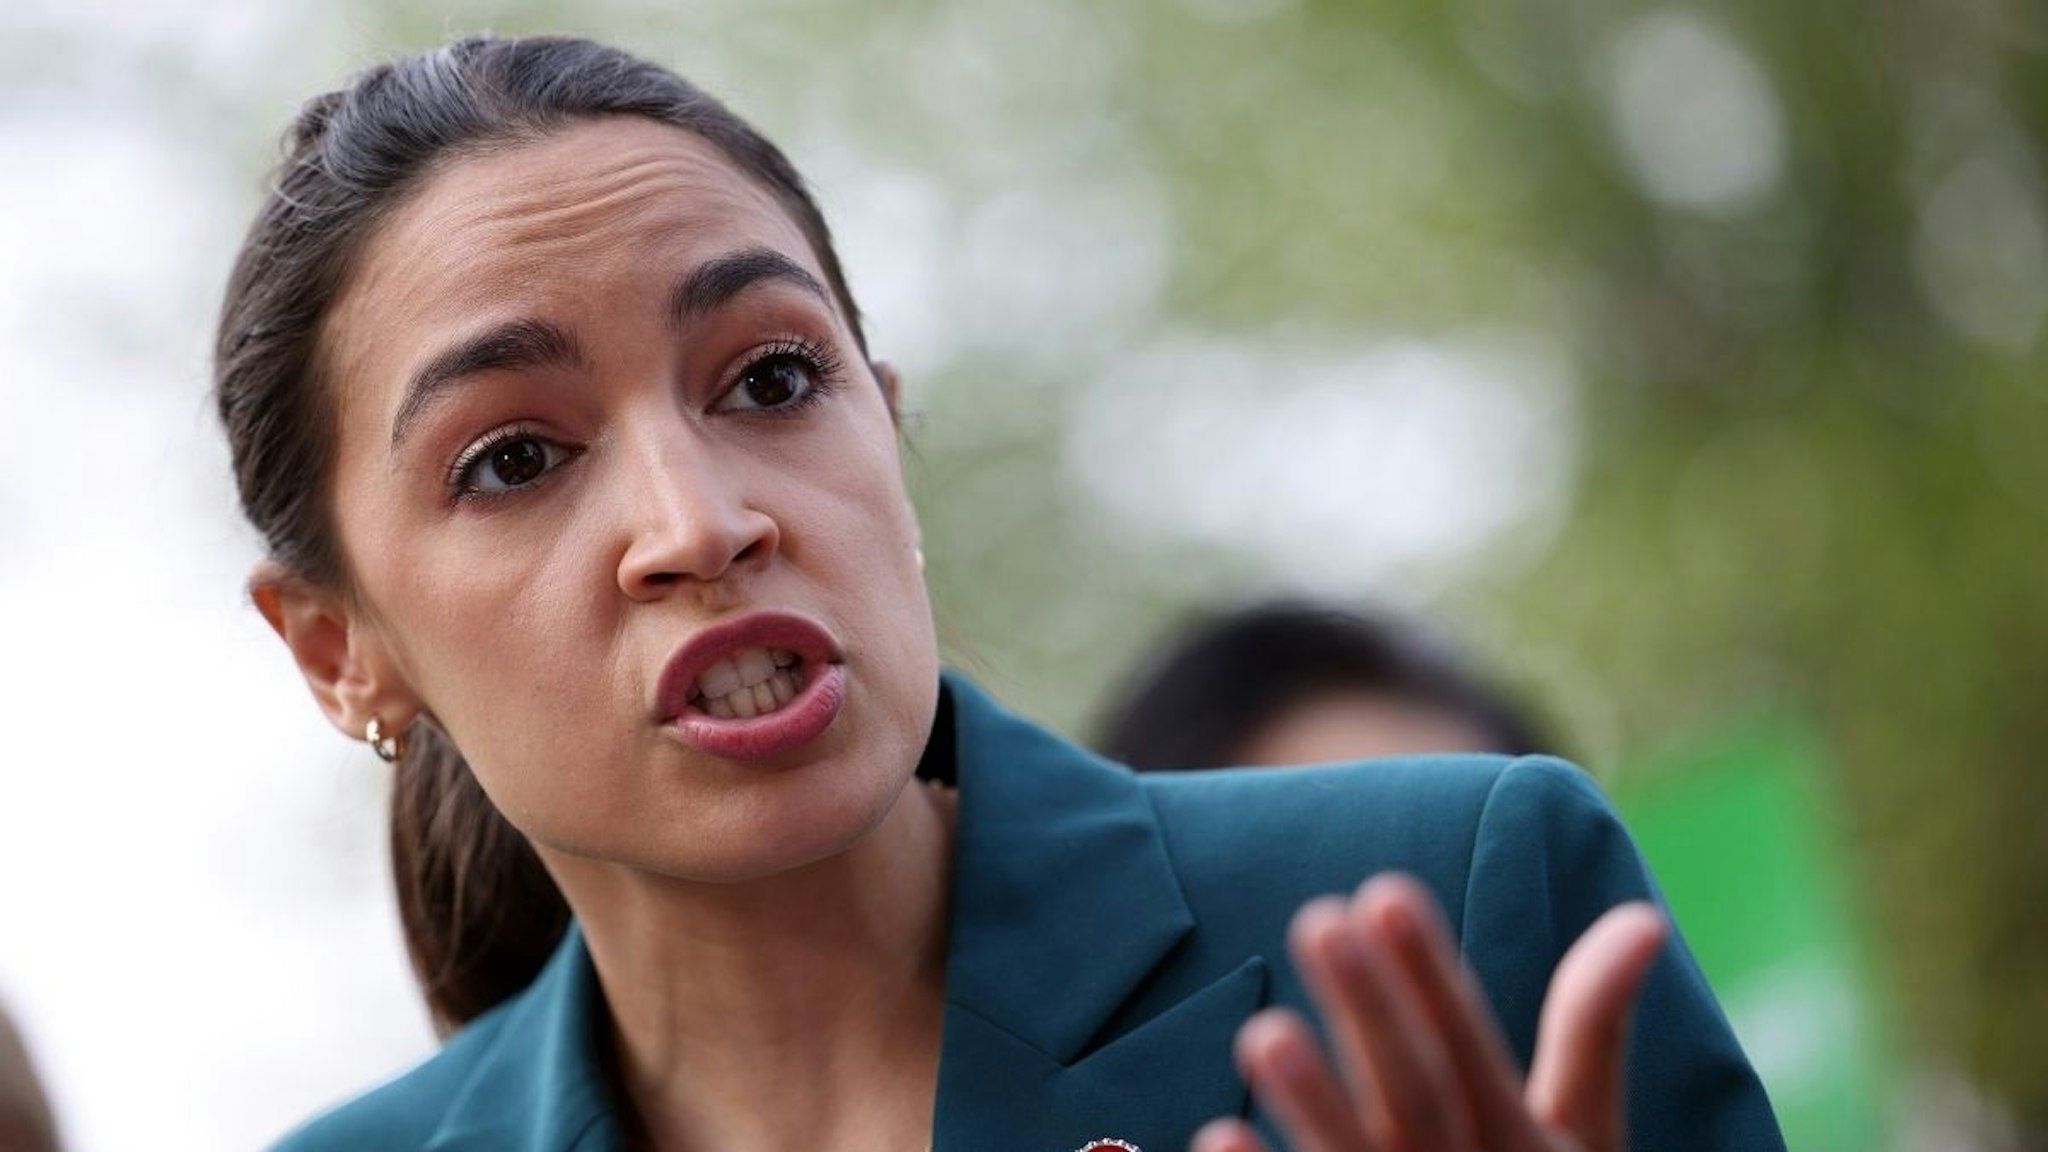 U.S. Rep. Alexandria Ocasio-Cortez (D-NY) speaks at a press conference urging the inclusion of the Civilian Climate Corps., a climate jobs program, in the budget reconciliation bill, outside of the U.S. Capitol on July 20, 2021 in Washington, DC.